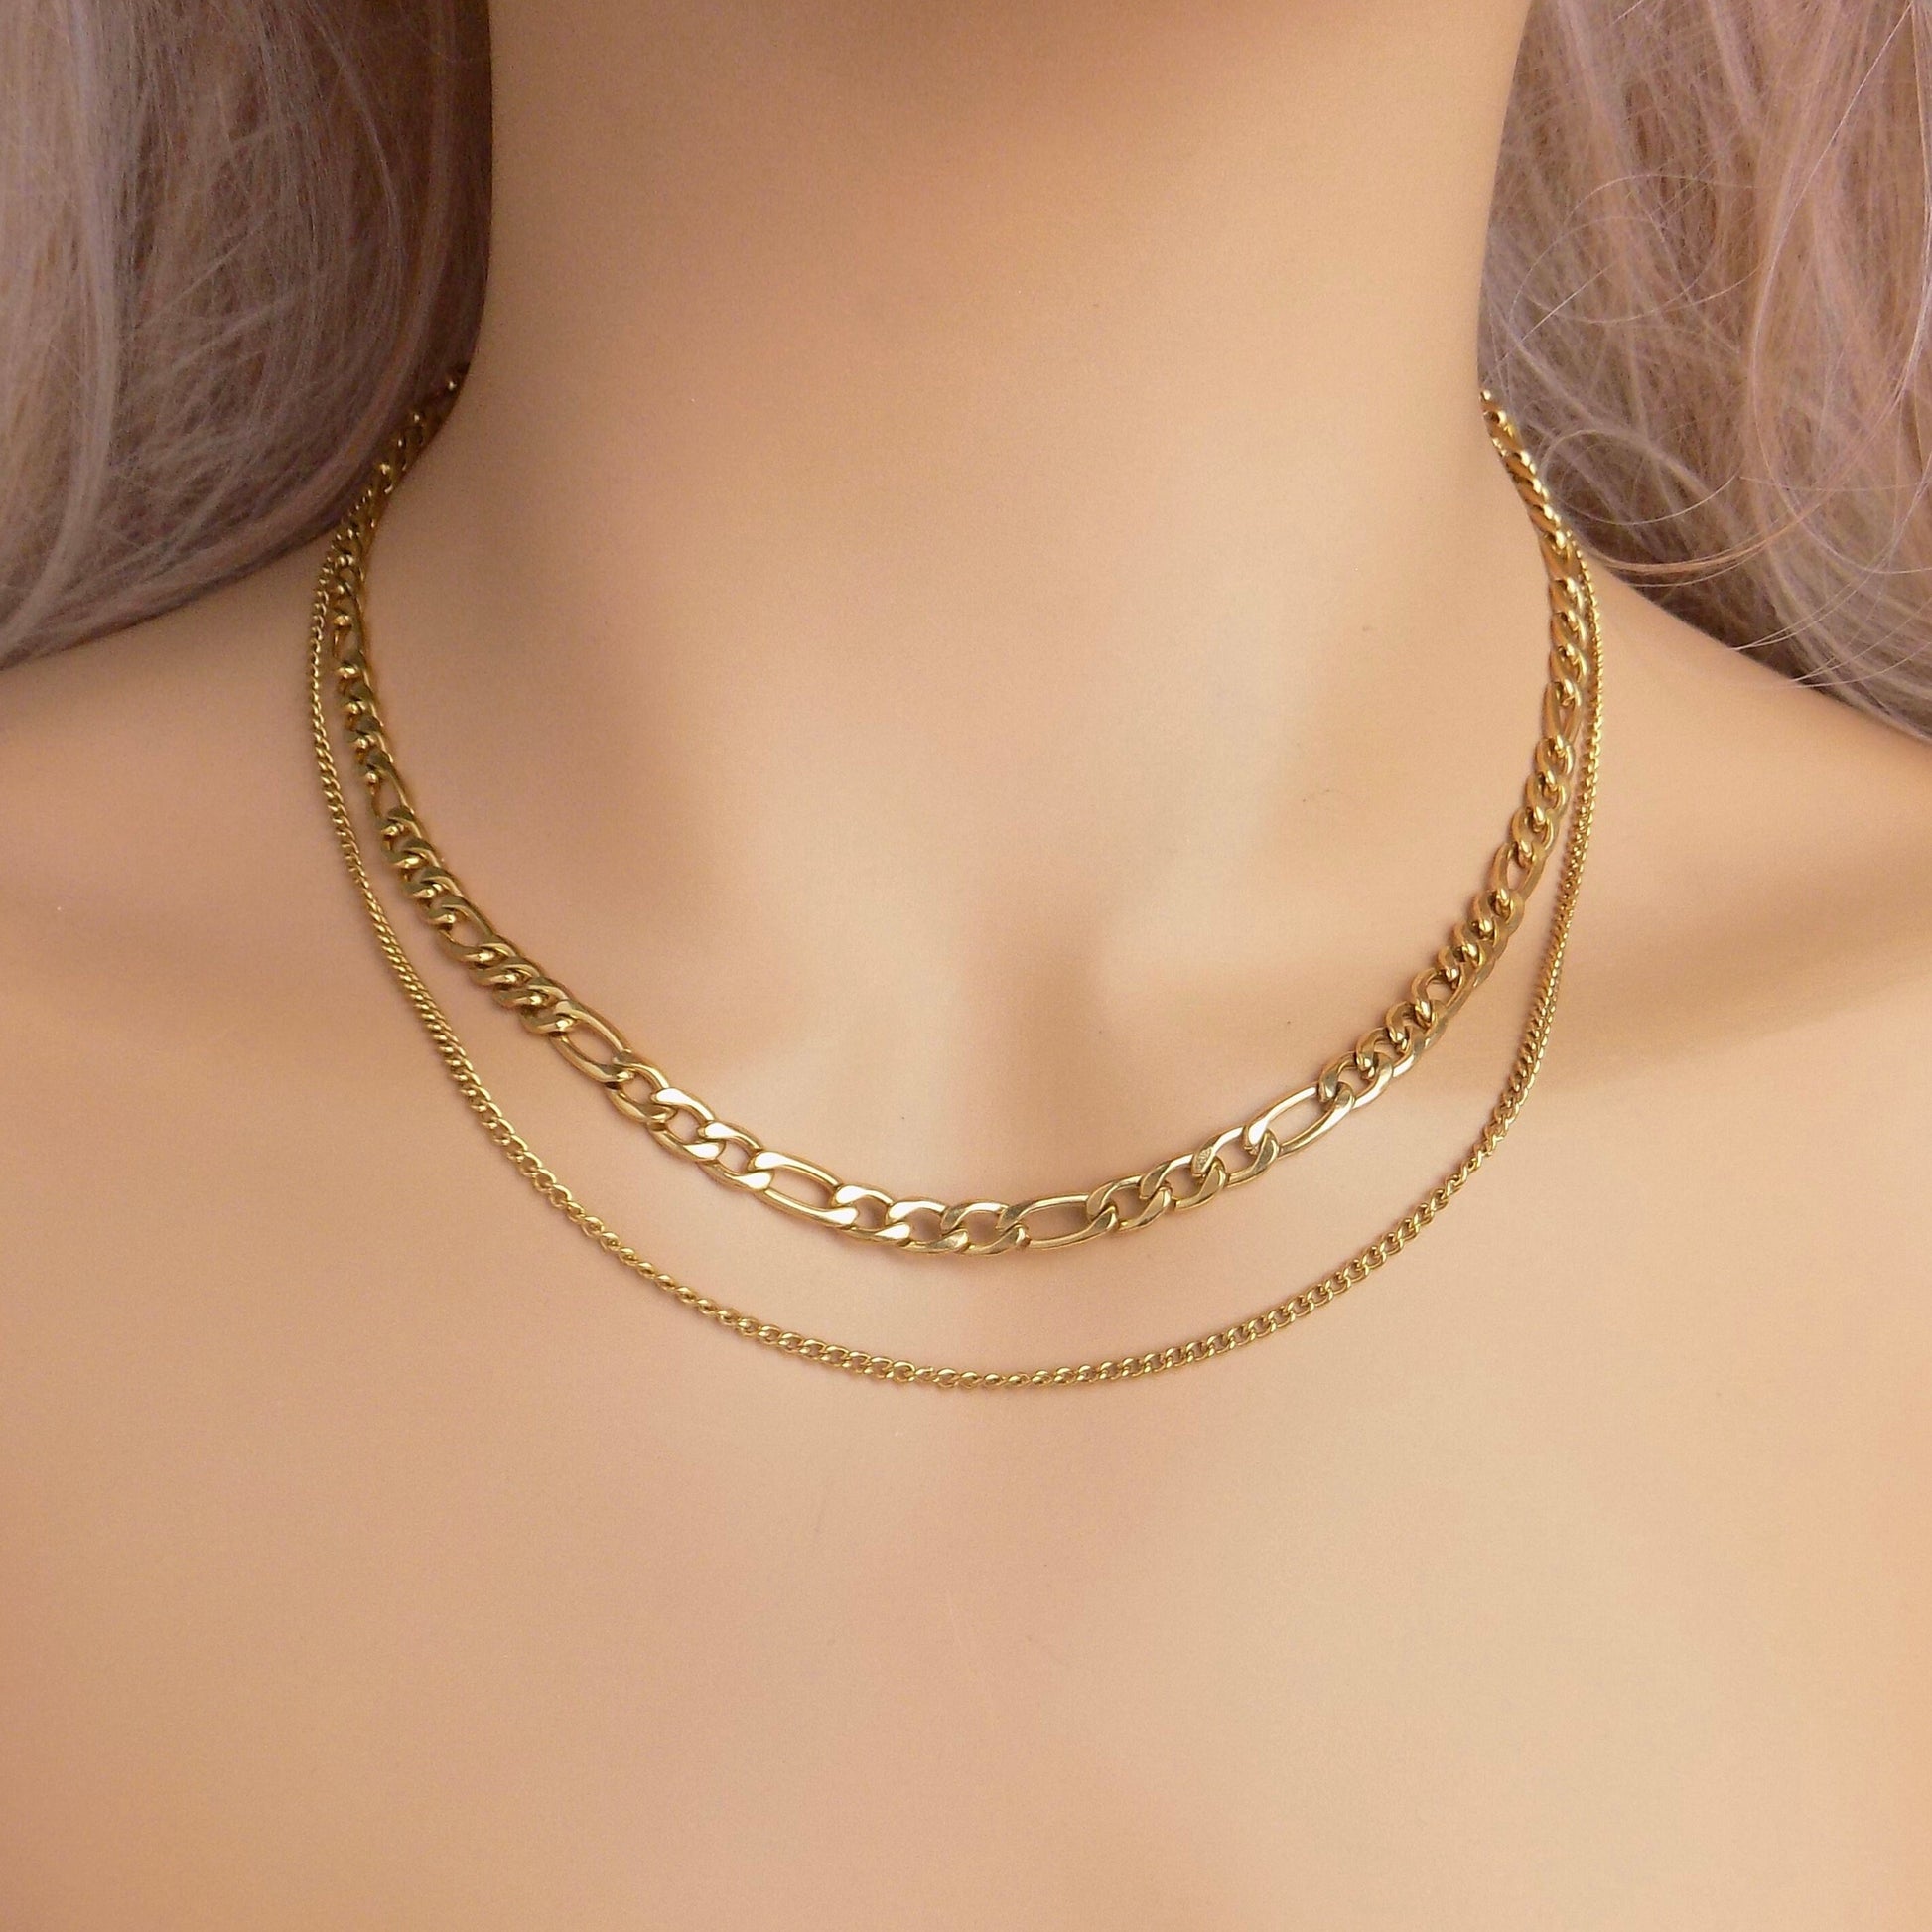 Chunky Chain Necklace Set of Two, Figaro Link Chain, 18K Gold Stainless Steel, Modern Jewelry, M7-85